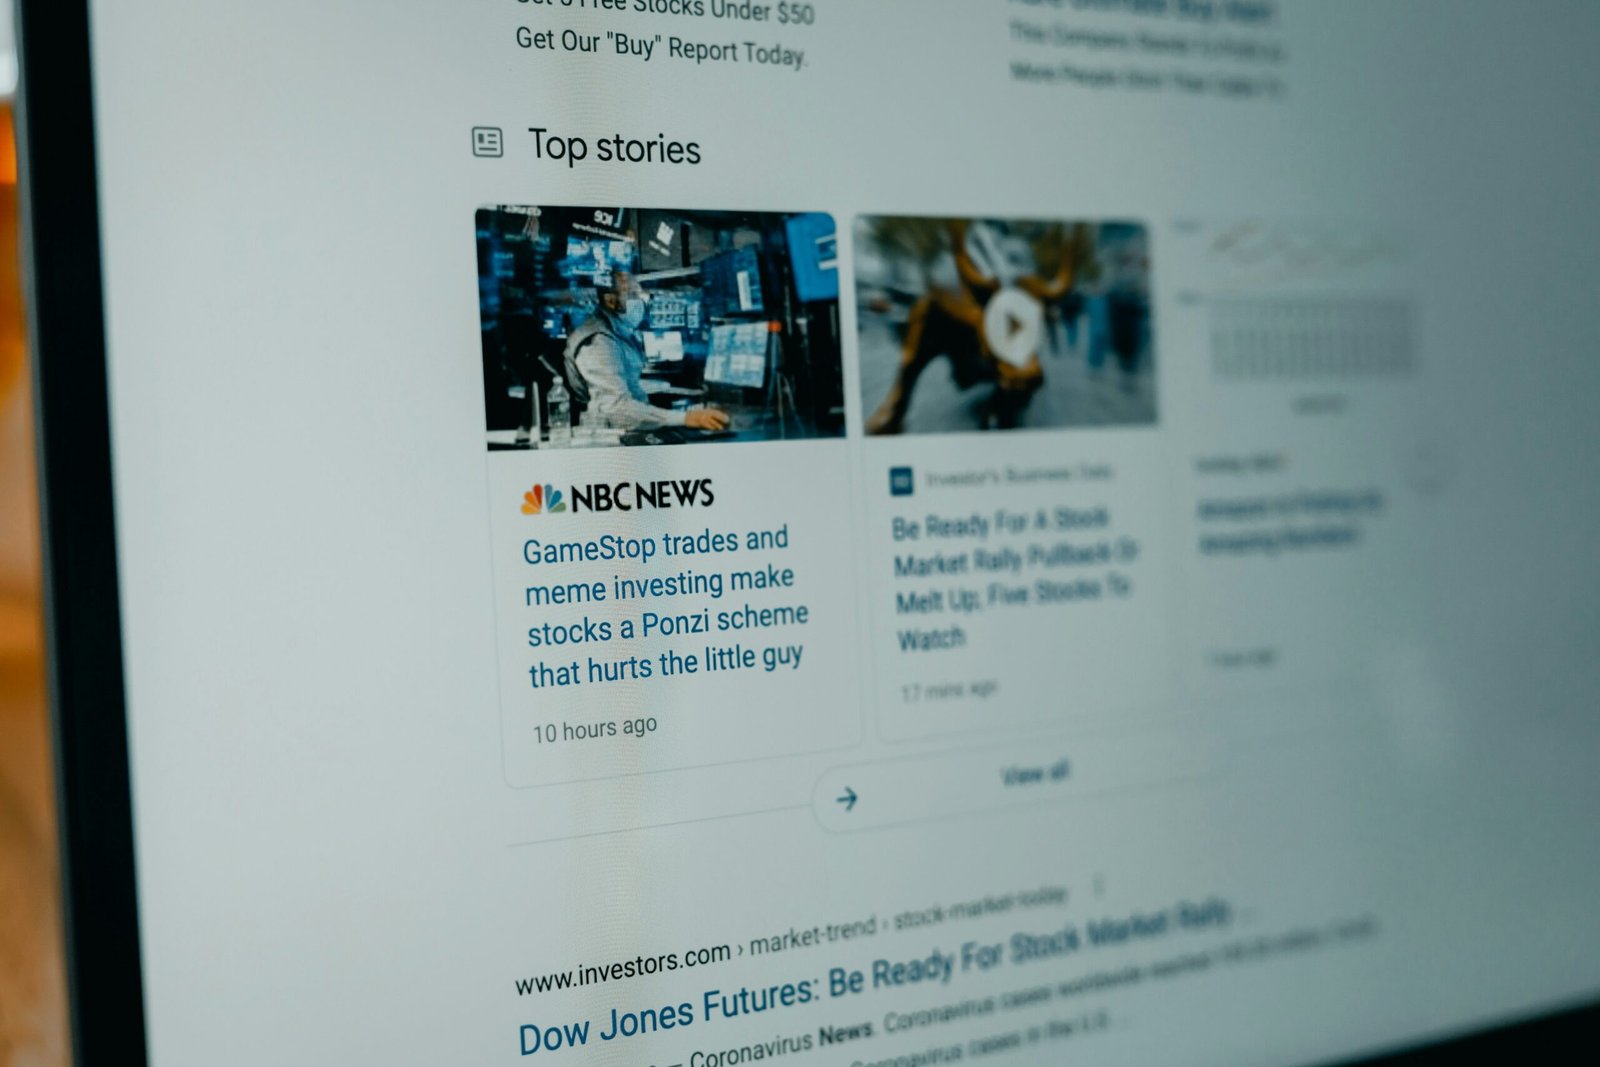 Google News: Stay Well-Informed with Breaking News